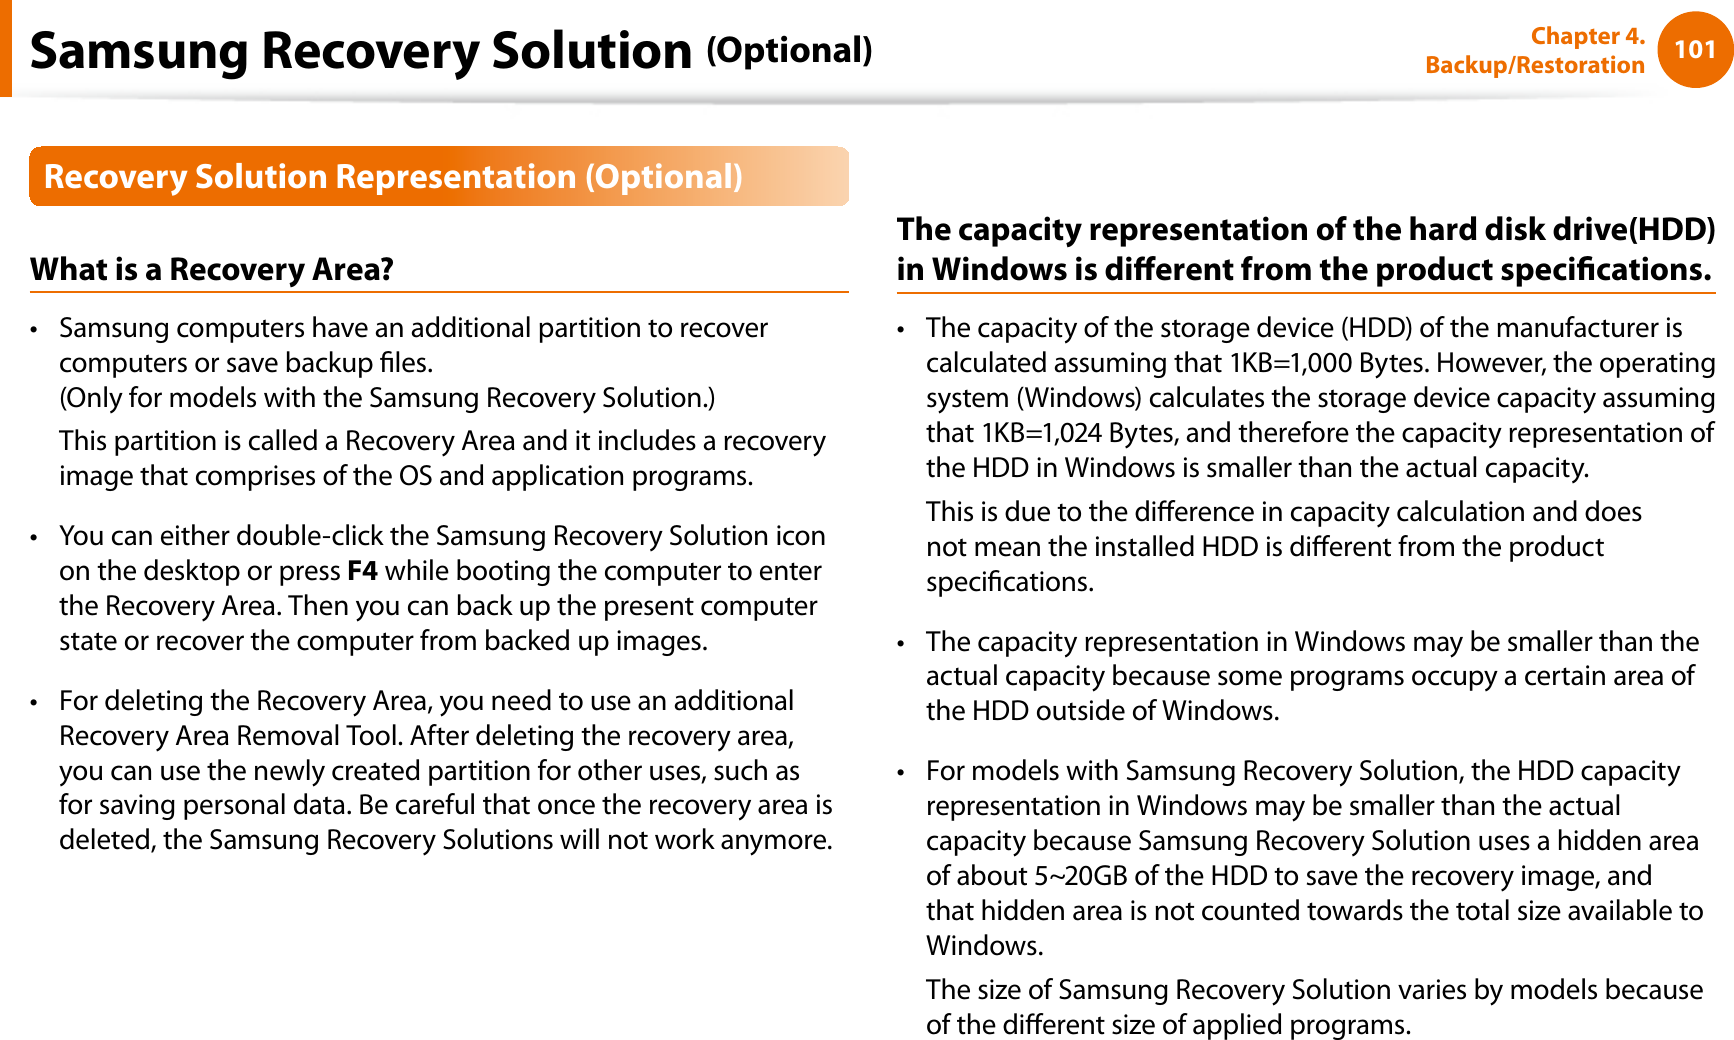 101Chapter 4. Backup/RestorationRecovery Solution Representation (Optional)What is a Recovery Area?Samsung computers have an additional partition to recover tcomputers or save backup les.(Only for models with the Samsung Recovery Solution.)This partition is called a Recovery Area and it includes a recovery image that comprises of the OS and application programs.You can either double-click the Samsung Recovery Solution icon ton the desktop or press F4 while booting the computer to enter the Recovery Area. Then you can back up the present computer state or recover the computer from backed up images.For deleting the Recovery Area, you need to use an additional tRecovery Area Removal Tool. After deleting the recovery area, you can use the newly created partition for other uses, such as for saving personal data. Be careful that once the recovery area is deleted, the Samsung Recovery Solutions will not work anymore.The capacity representation of the hard disk drive(HDD) in Windows is dierent from the product specications.The capacity of the storage device (HDD) of the manufacturer is tcalculated assuming that 1KB=1,000 Bytes. However, the operating system (Windows) calculates the storage device capacity assuming that 1KB=1,024 Bytes, and therefore the capacity representation of the HDD in Windows is smaller than the actual capacity.This is due to the dierence in capacity calculation and does not mean the installed HDD is dierent from the product specications.The capacity representation in Windows may be smaller than the tactual capacity because some programs occupy a certain area of the HDD outside of Windows.For models with Samsung Recovery Solution, the HDD capacity trepresentation in Windows may be smaller than the actual capacity because Samsung Recovery Solution uses a hidden area of about 5~20GB of the HDD to save the recovery image, and that hidden area is not counted towards the total size available to Windows.The size of Samsung Recovery Solution varies by models because of the dierent size of applied programs.Samsung Recovery Solution (Optional)